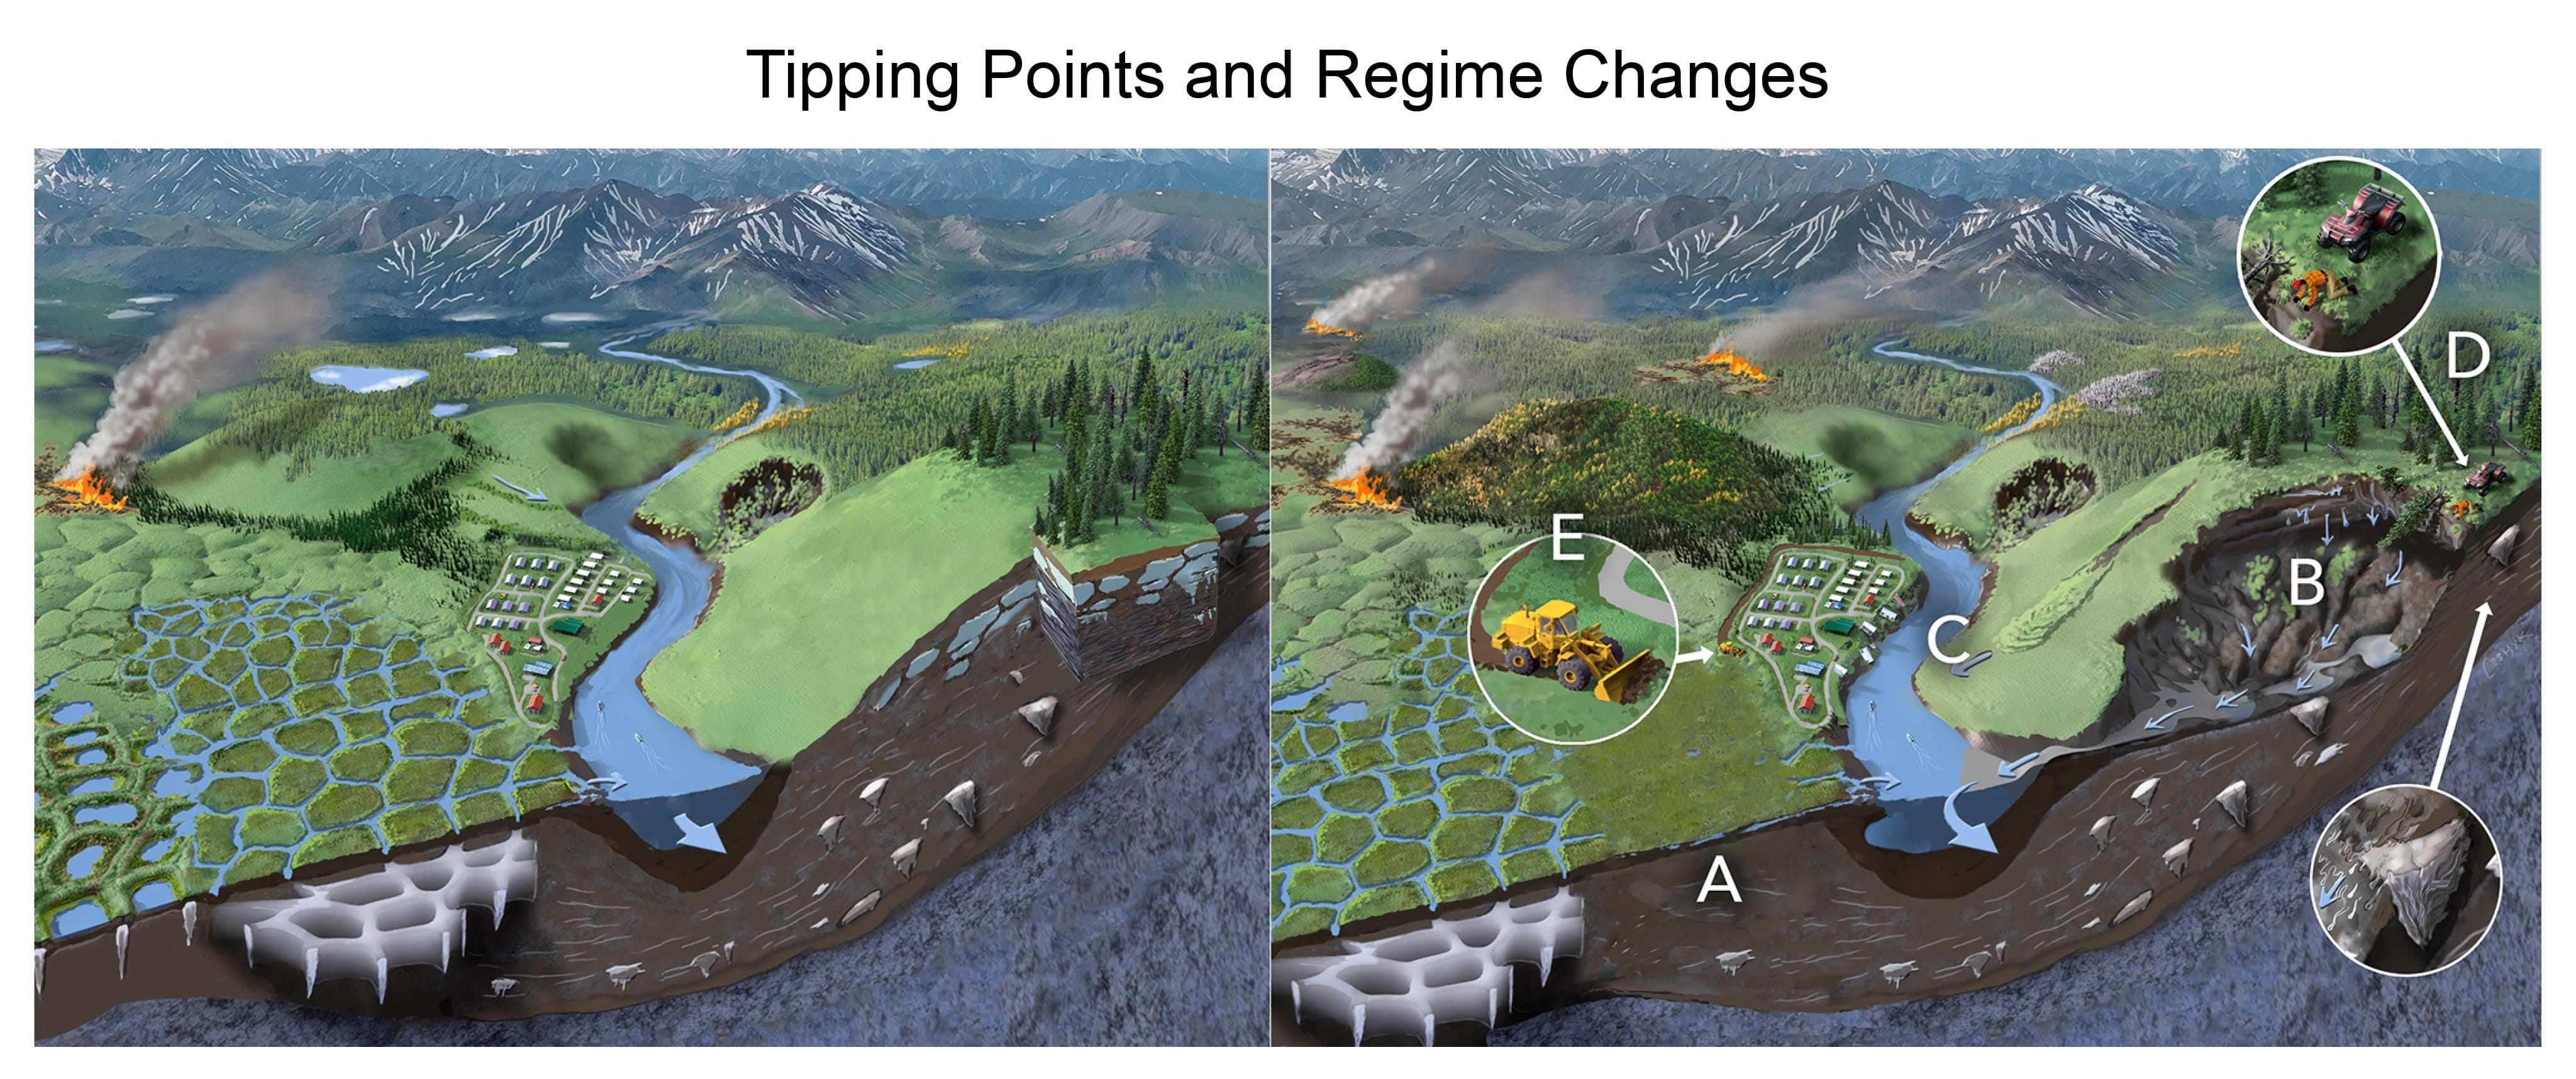 graphic depicting tipping points and regime changes in landscape